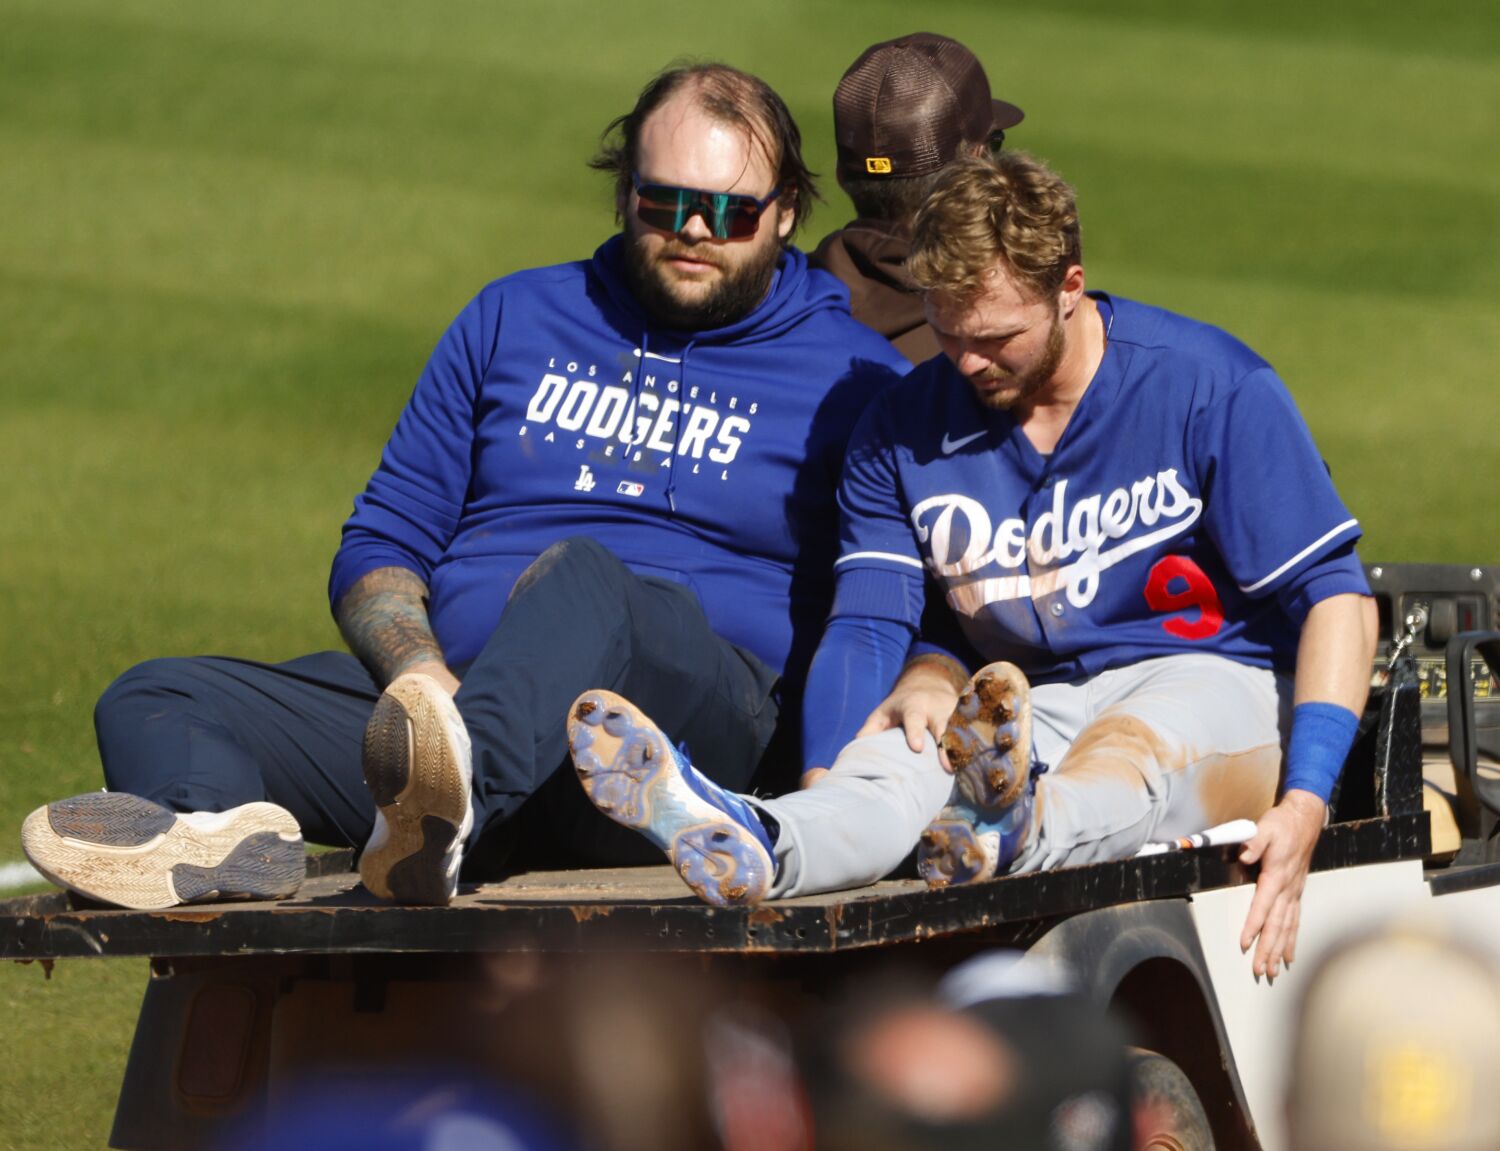 Dodgers shortstop Gavin Lux has torn ACL and is expected to miss 2023 season